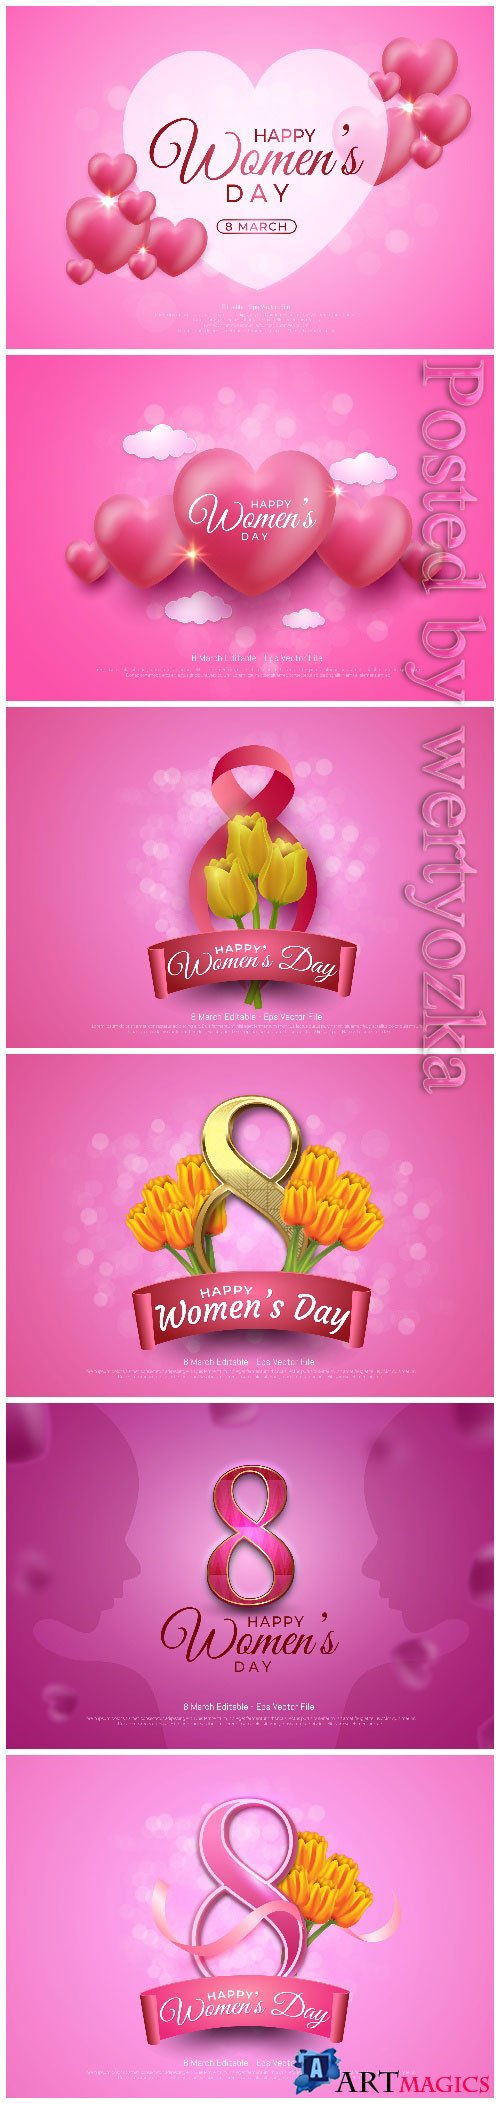 Editable text effect, women's day 8 march with flowers